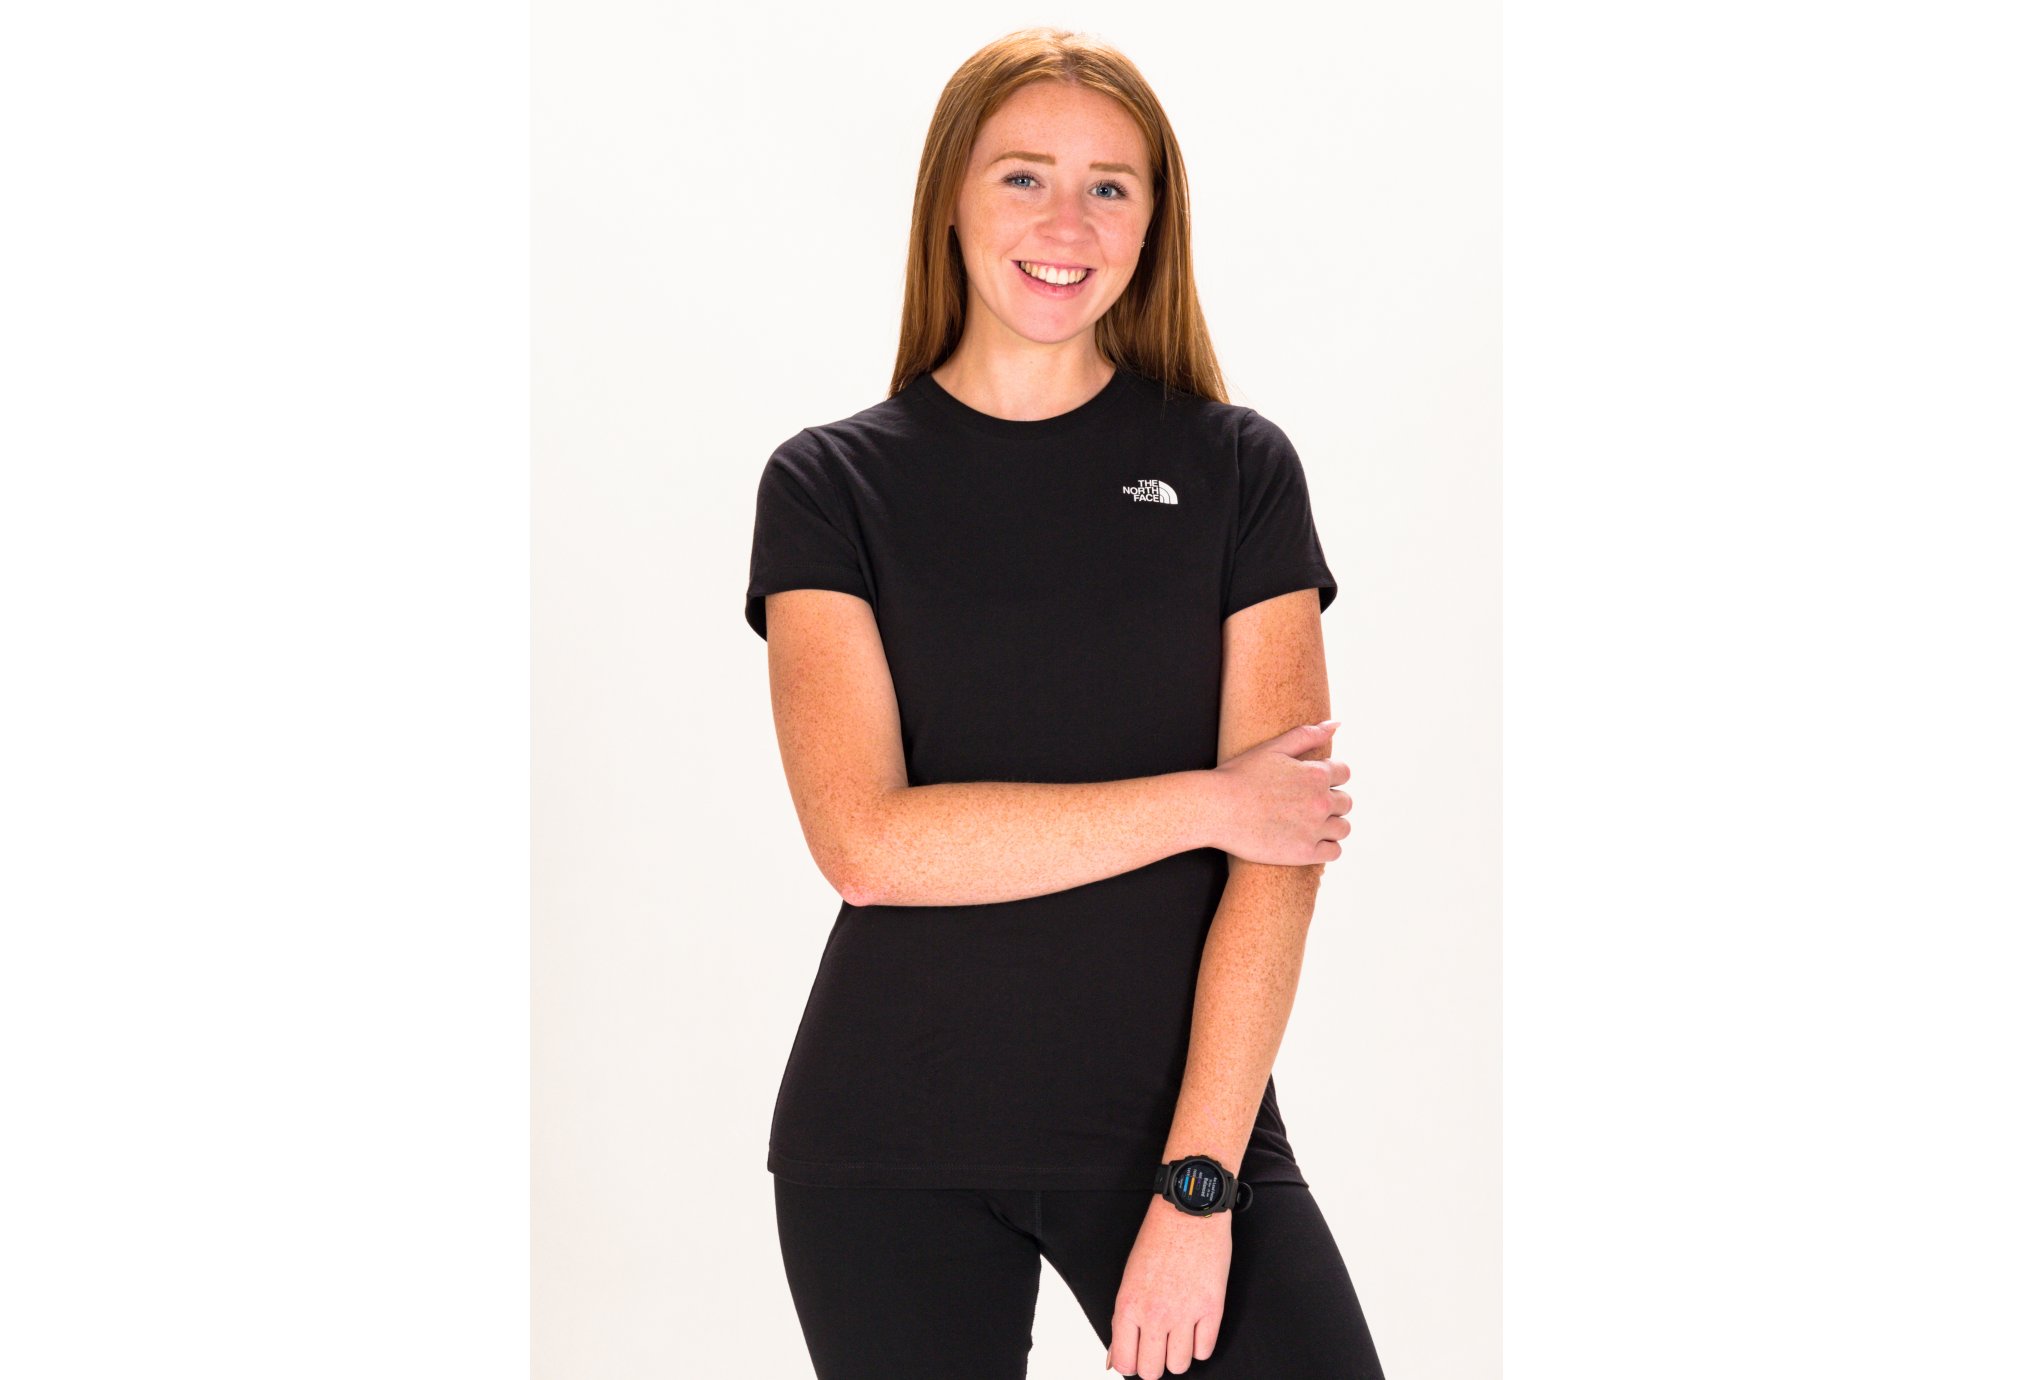 The North Face Simple Dome W vêtement running femme